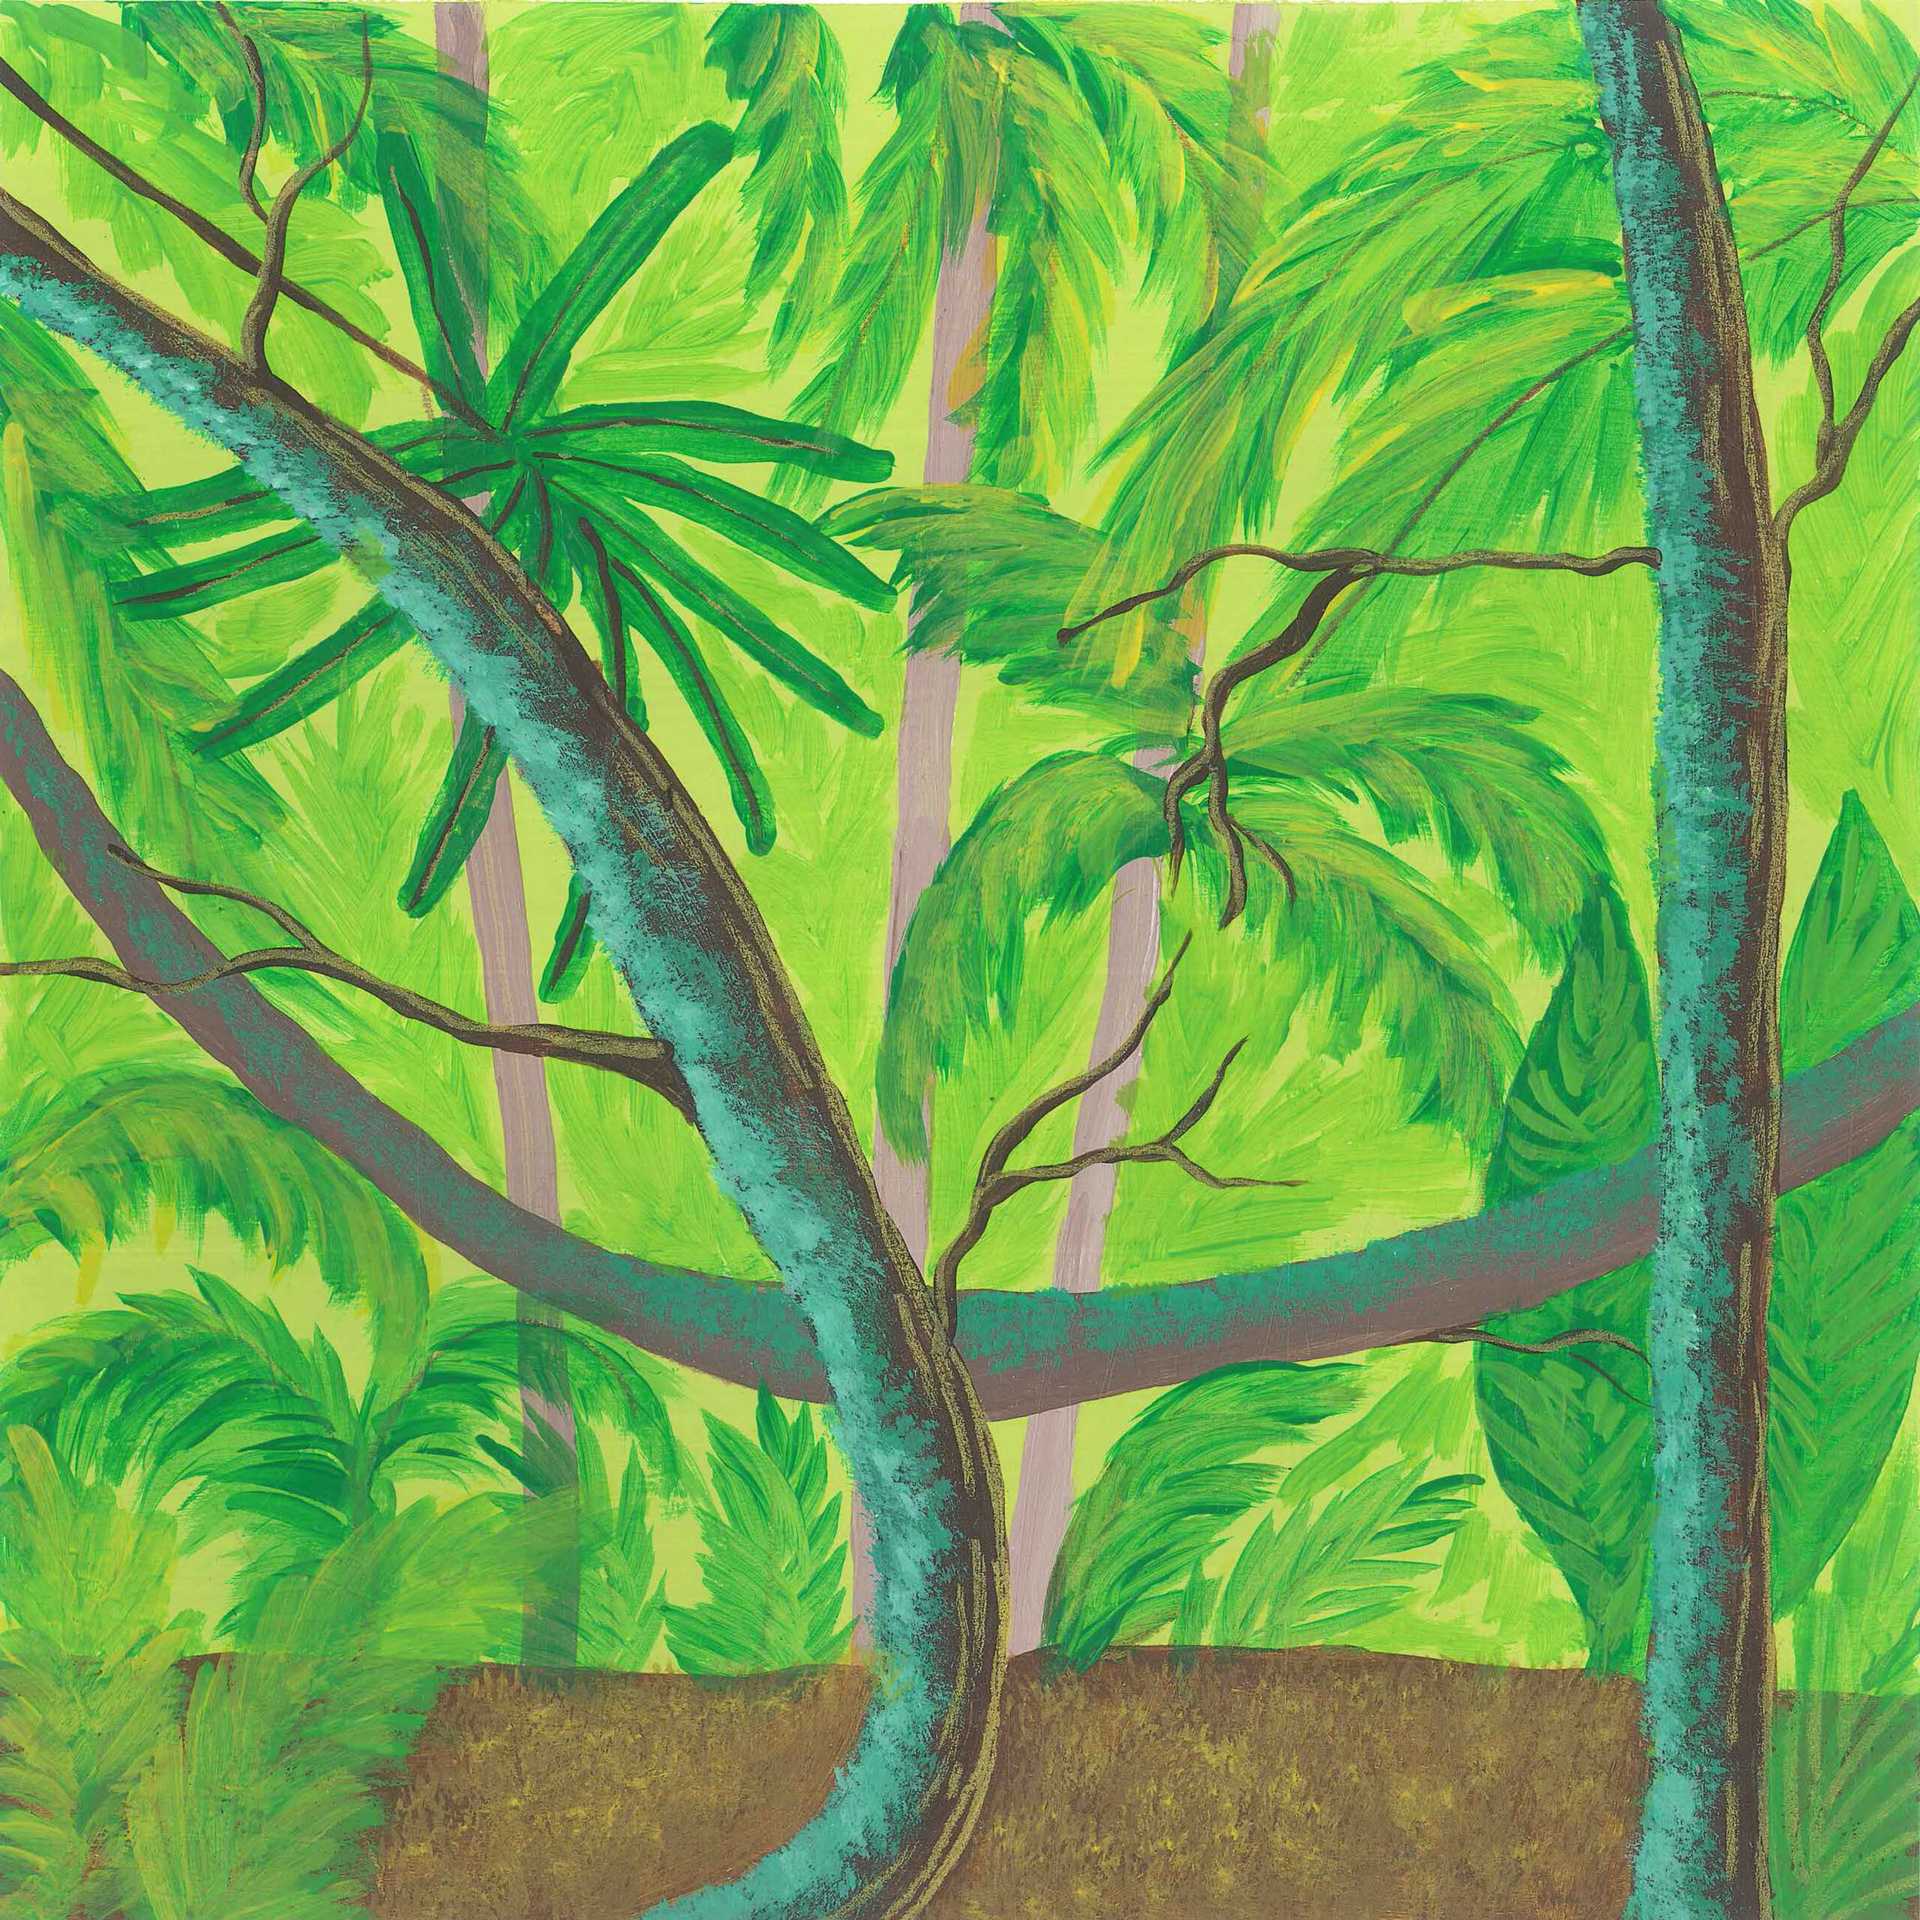 Wild Pacific Mangroves - nature landscape painting - earth.fm